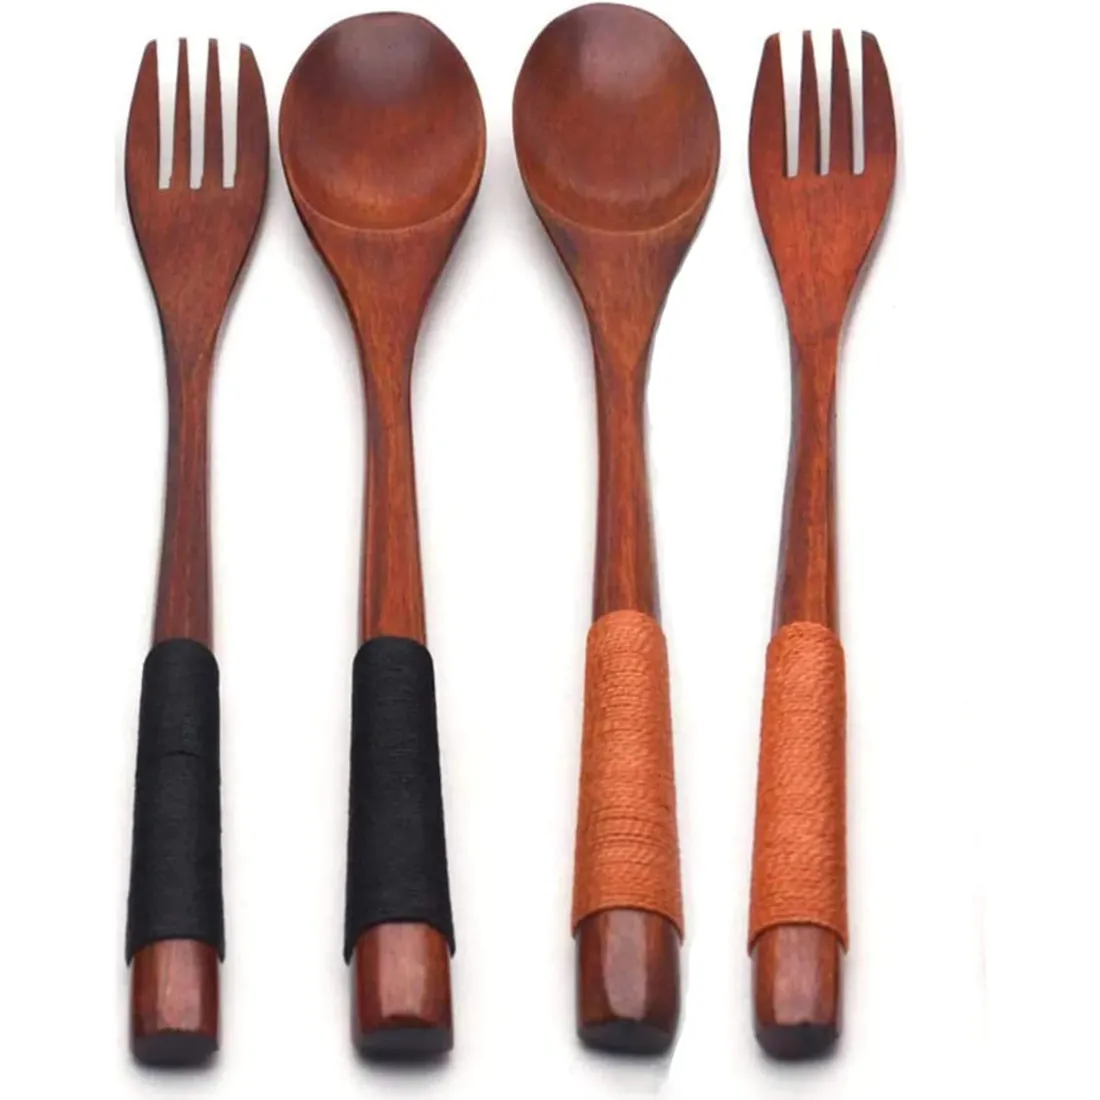 Home and Kitchenware Food Serving Cutlery Set Superior Quality Bamboo Wooden Wedding and Events Spoon Fork Knife Set